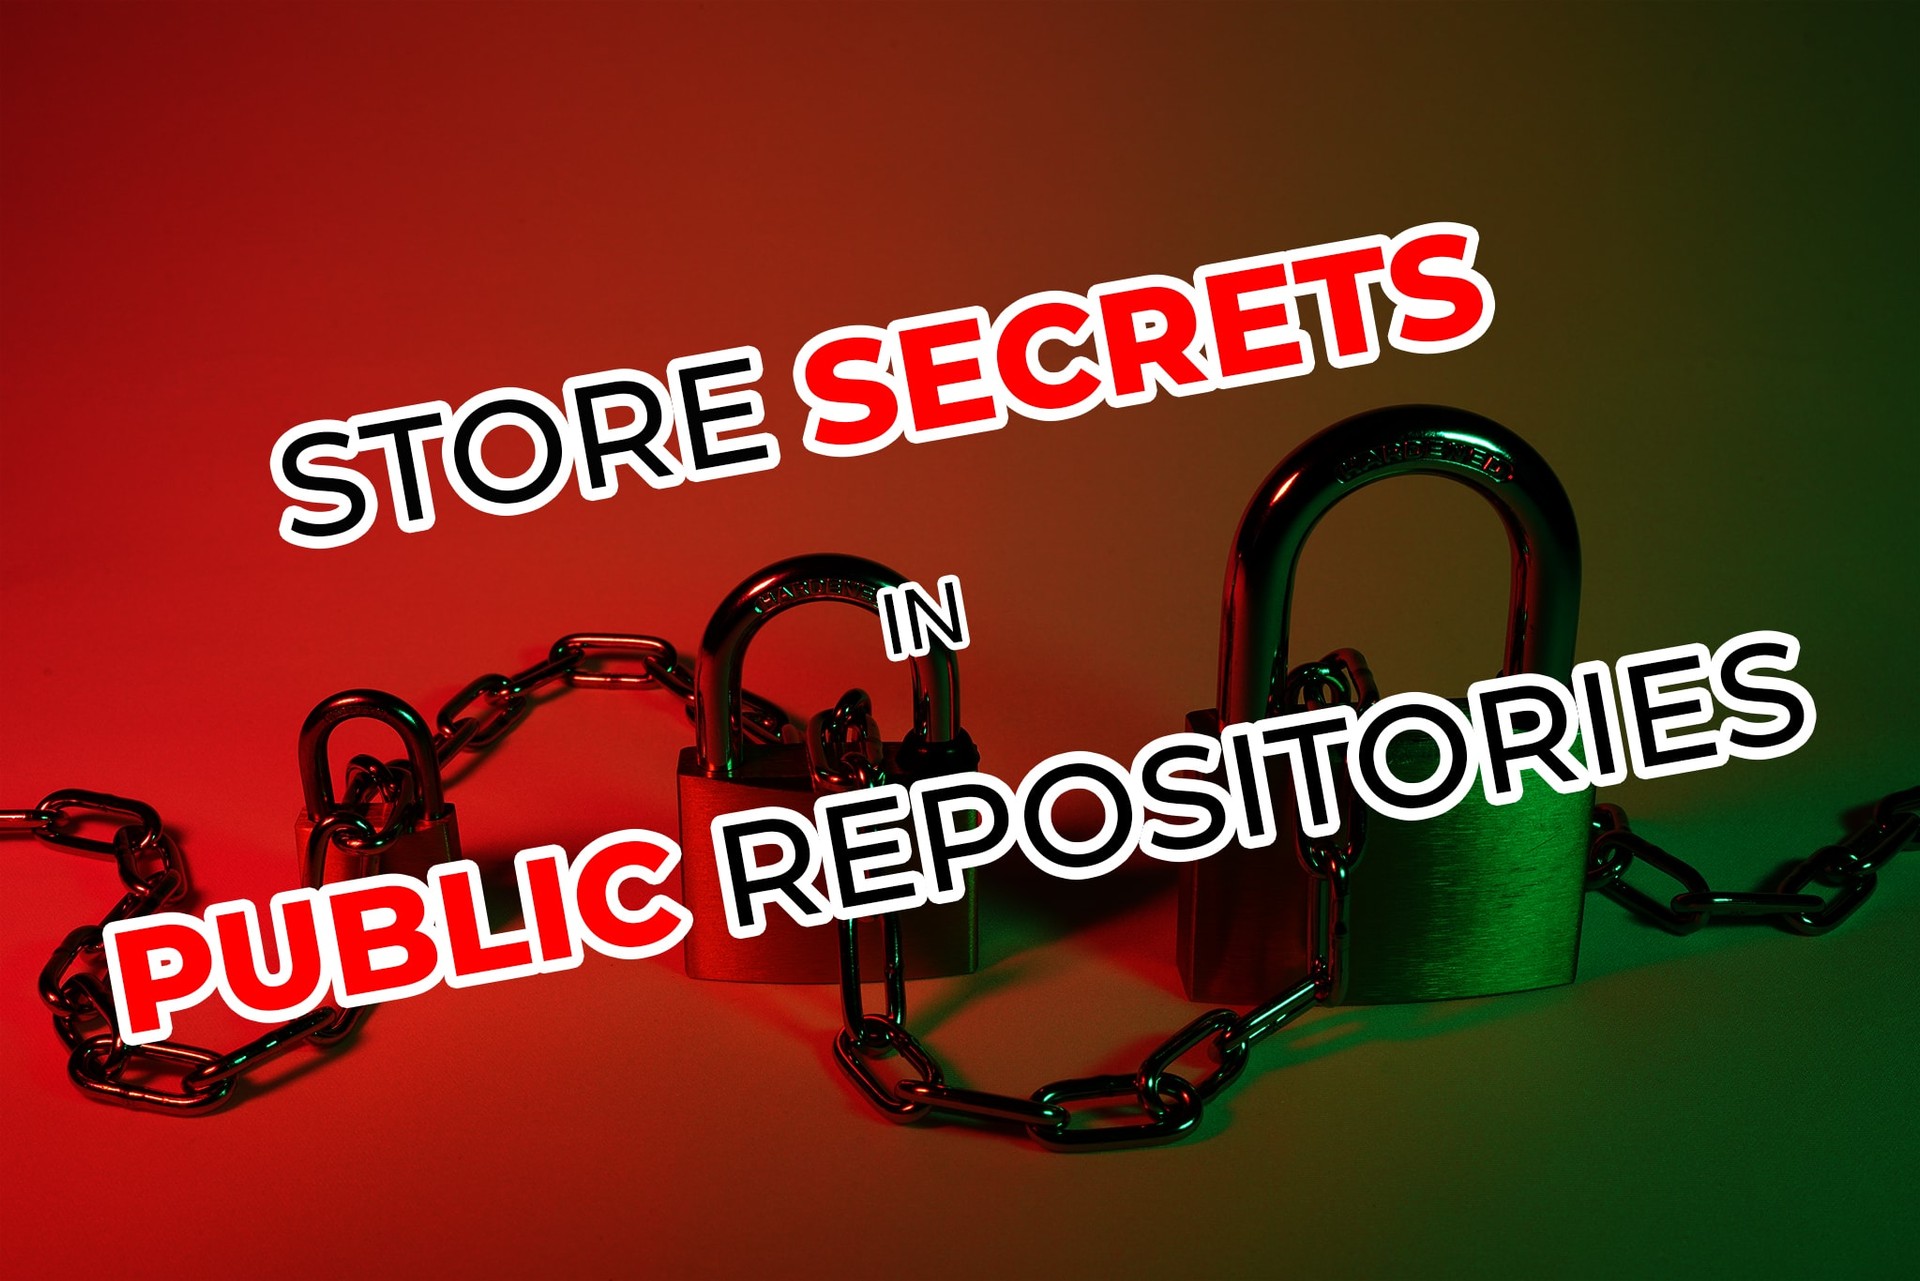 How to store secrets in public repositories cover image